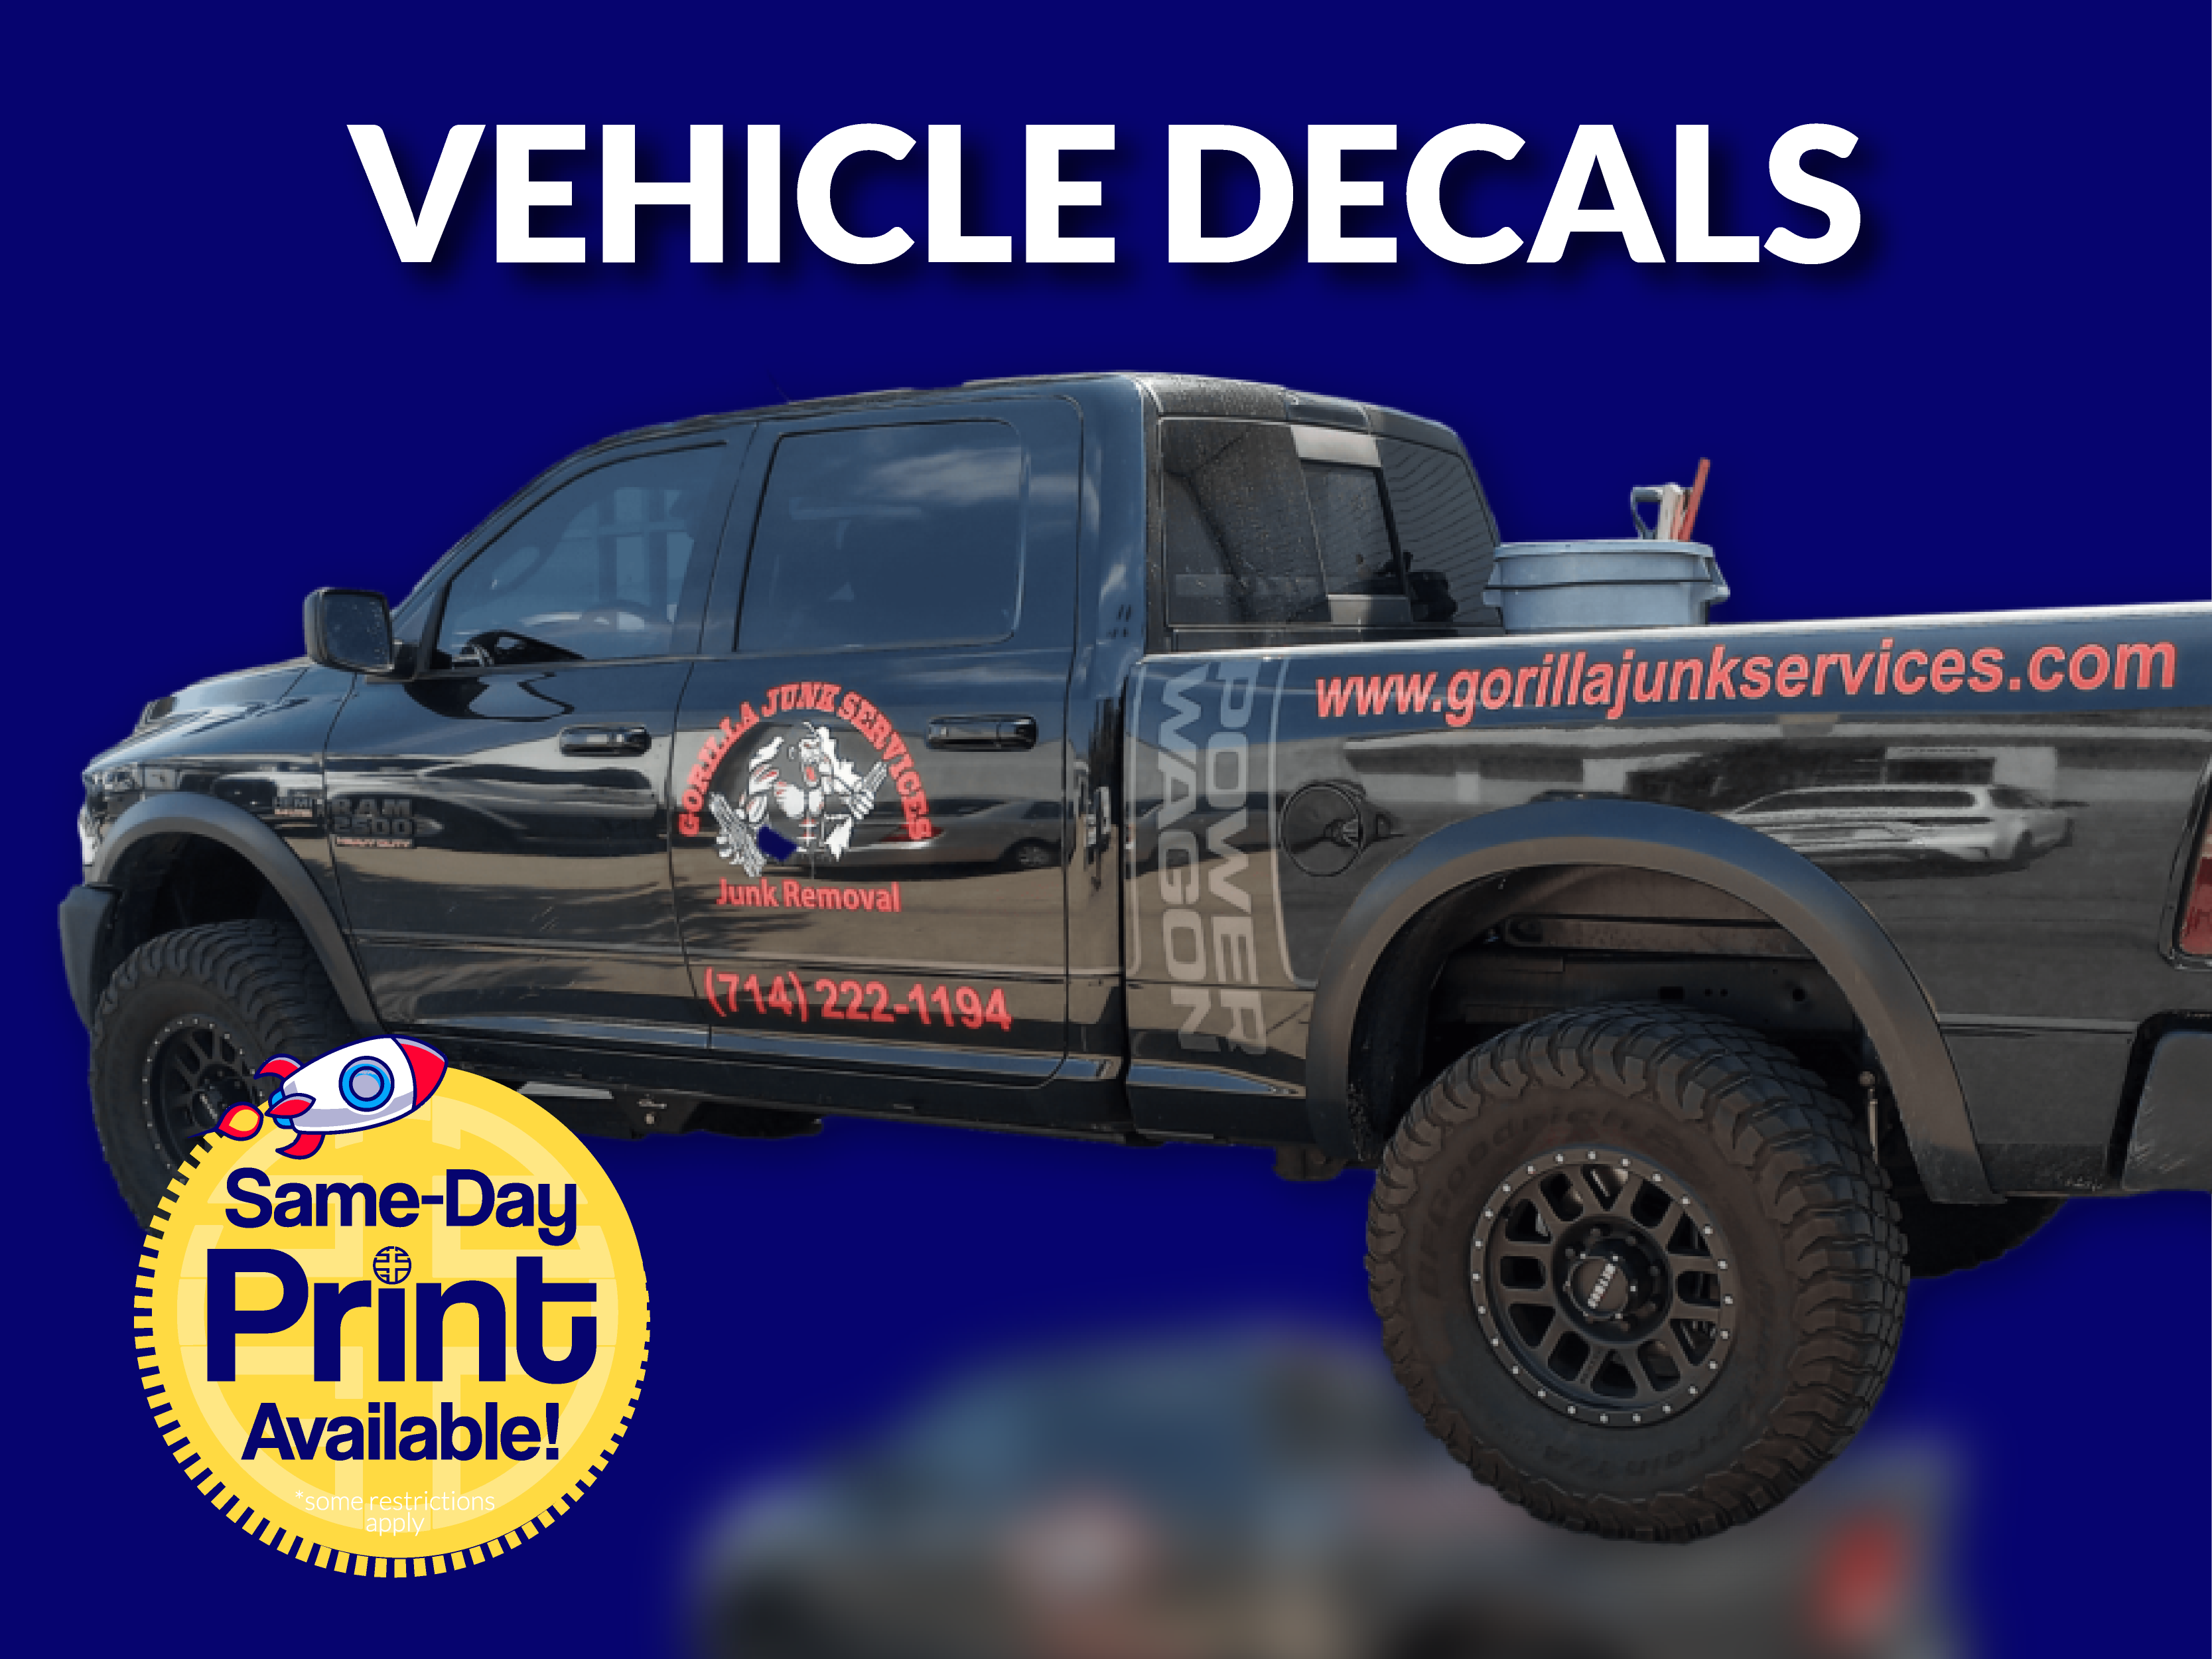 This image refers to our Vehicle Decals promotion with Same Day Print Available. To learn more about Vehicle Decals, feel free to check out the 'Products' section in the menu. Happy exploring!